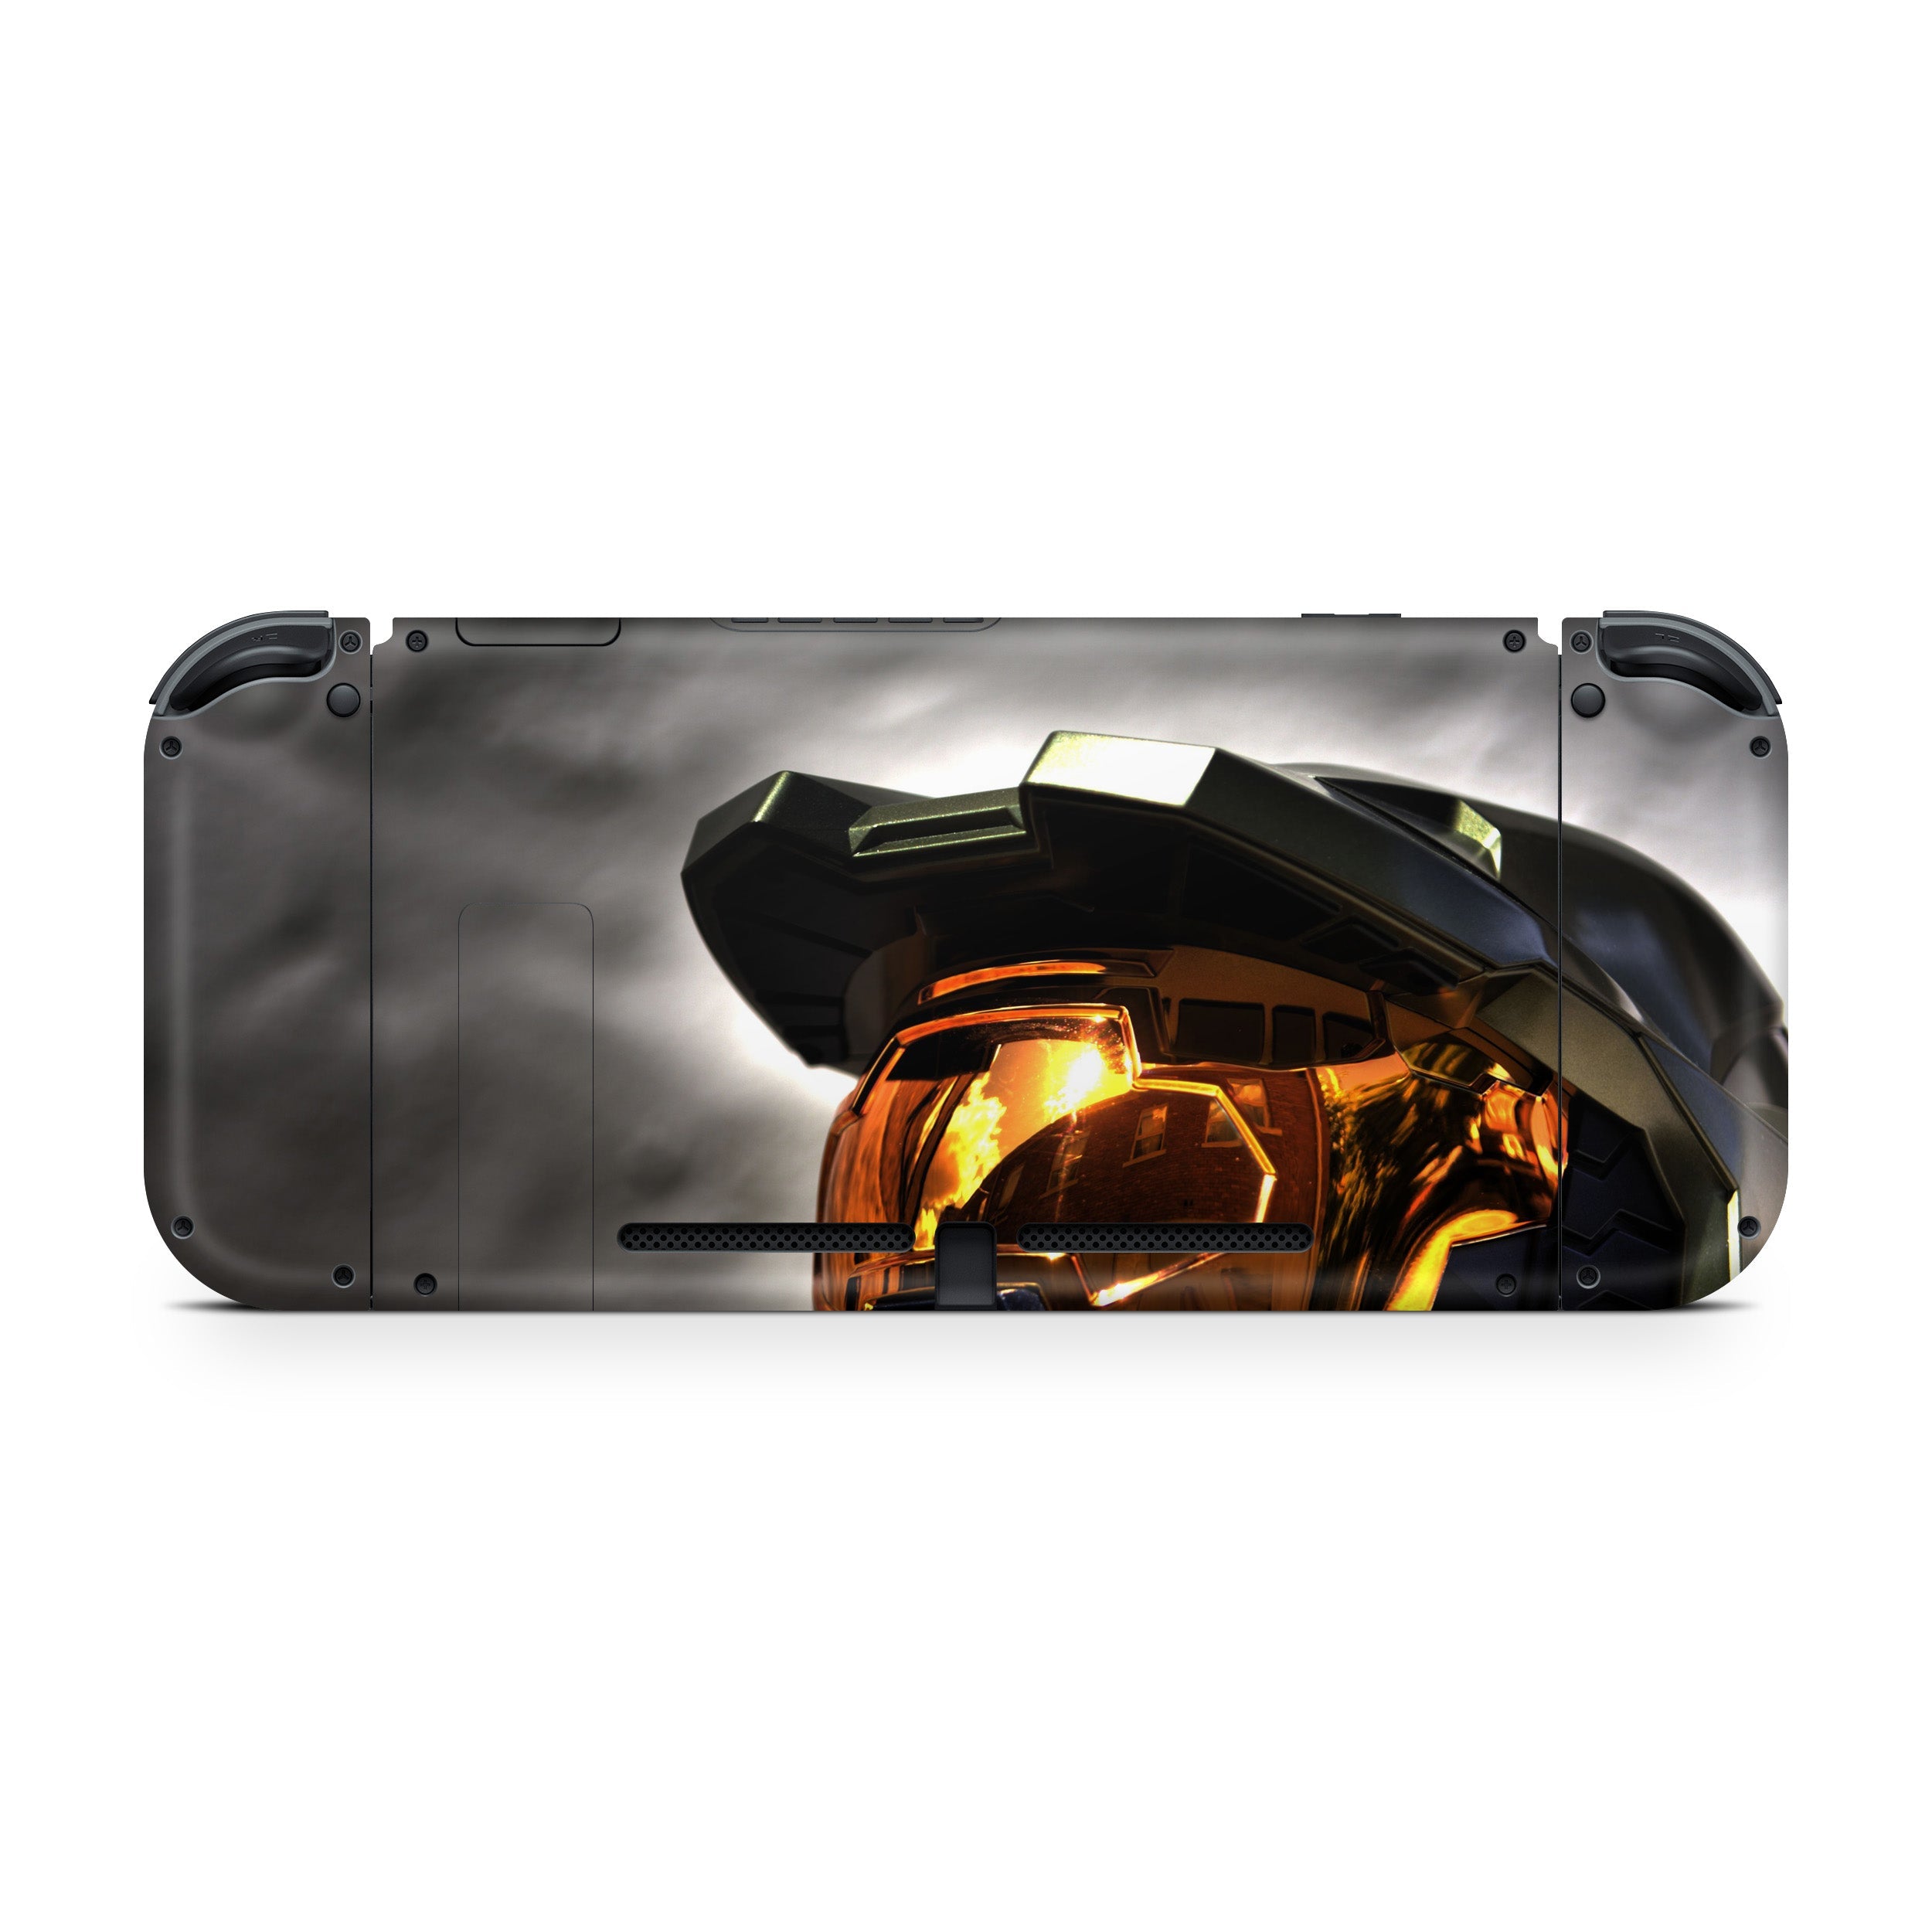 A video game skin featuring a Halo design for the Nintendo Switch.